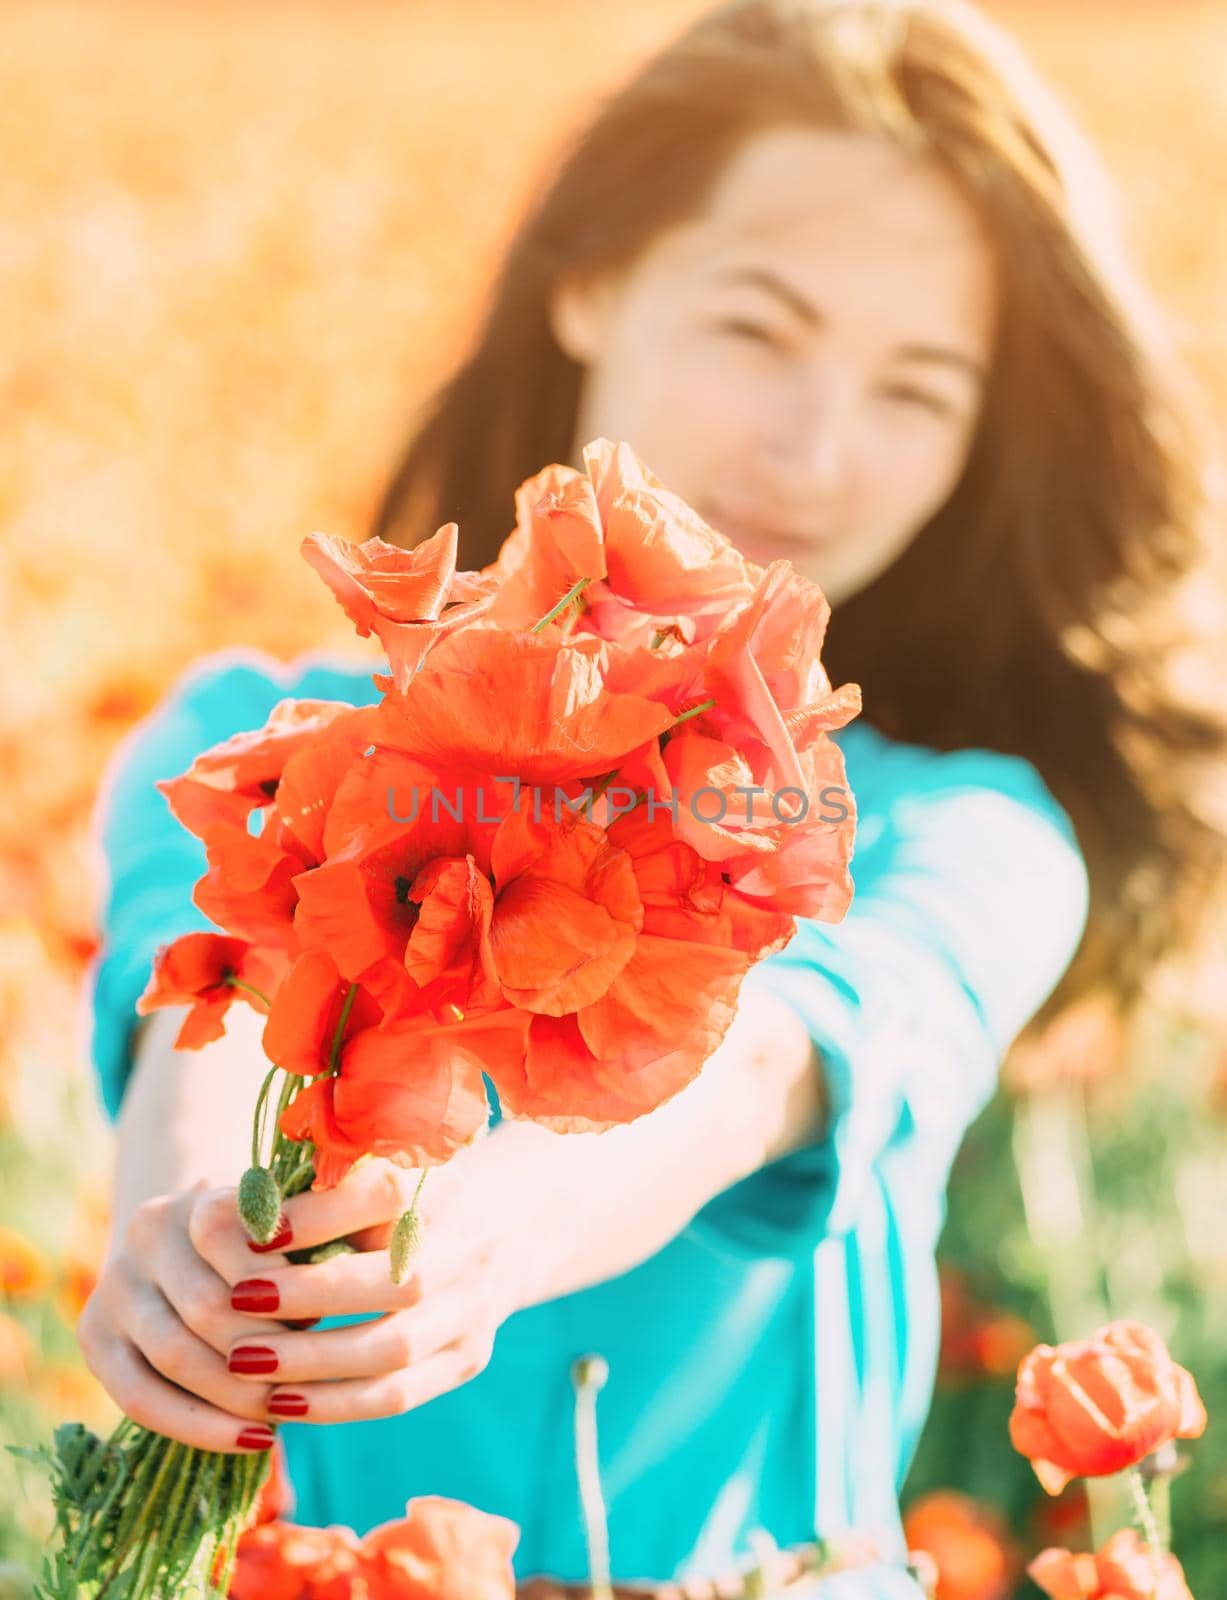 Beautiful brunette young woman giving a bouquet of poppies outdoor, focus on flowers.